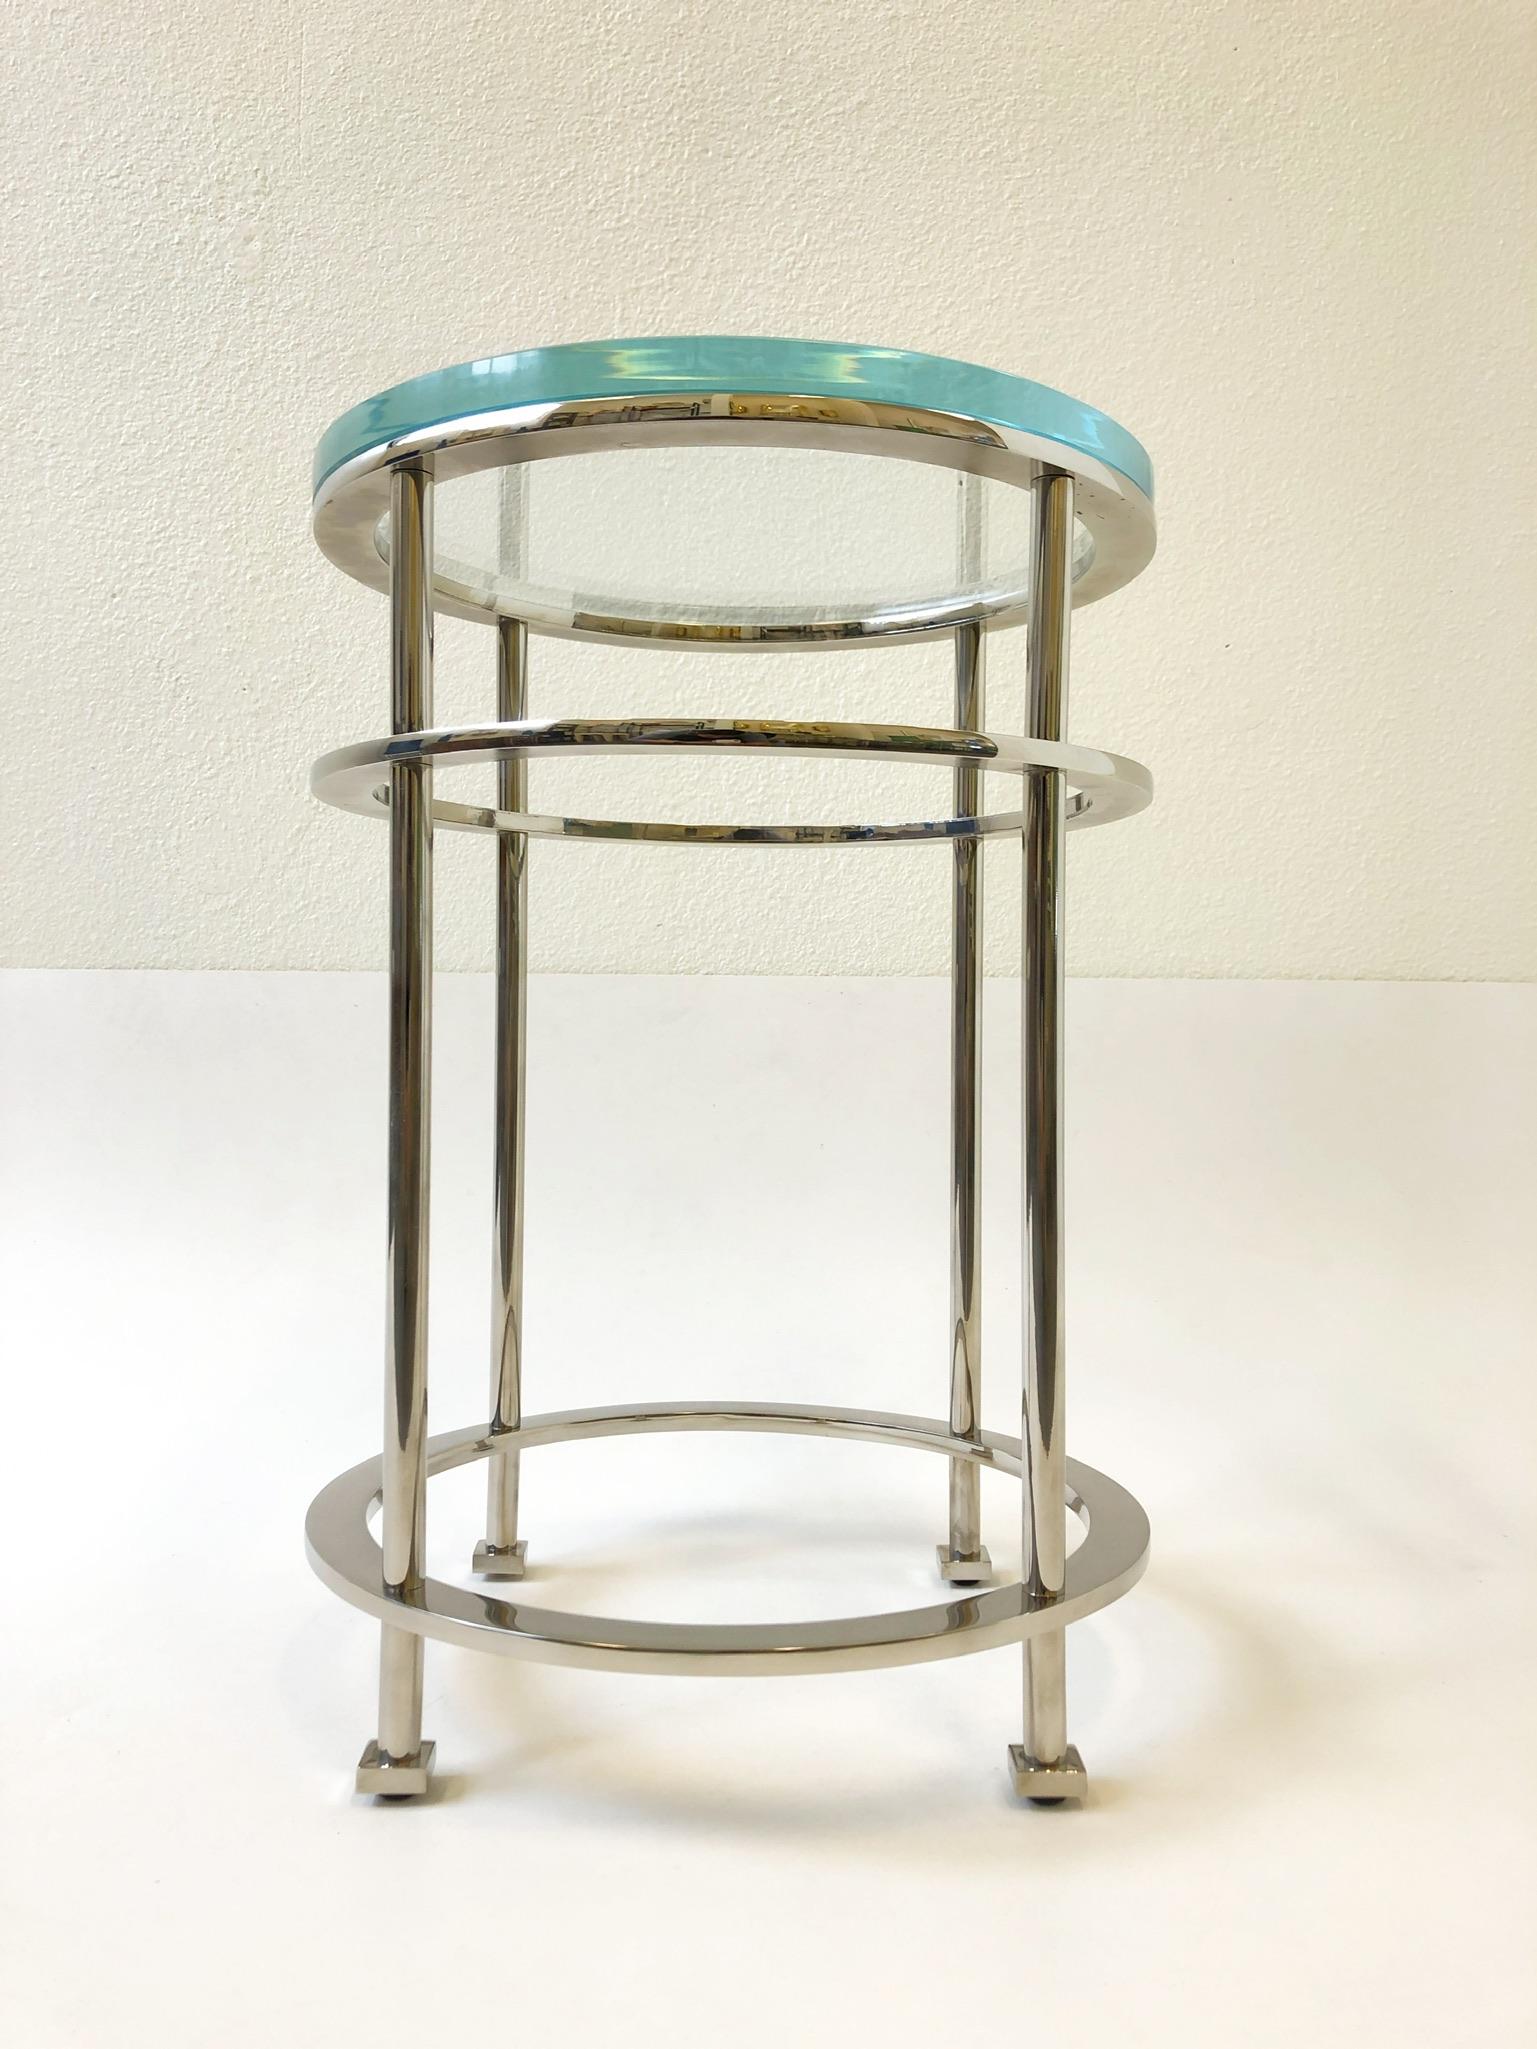 Pair of Nickel and Lucite Side Tables by Jean Michel Wilmotte for Mirak 3